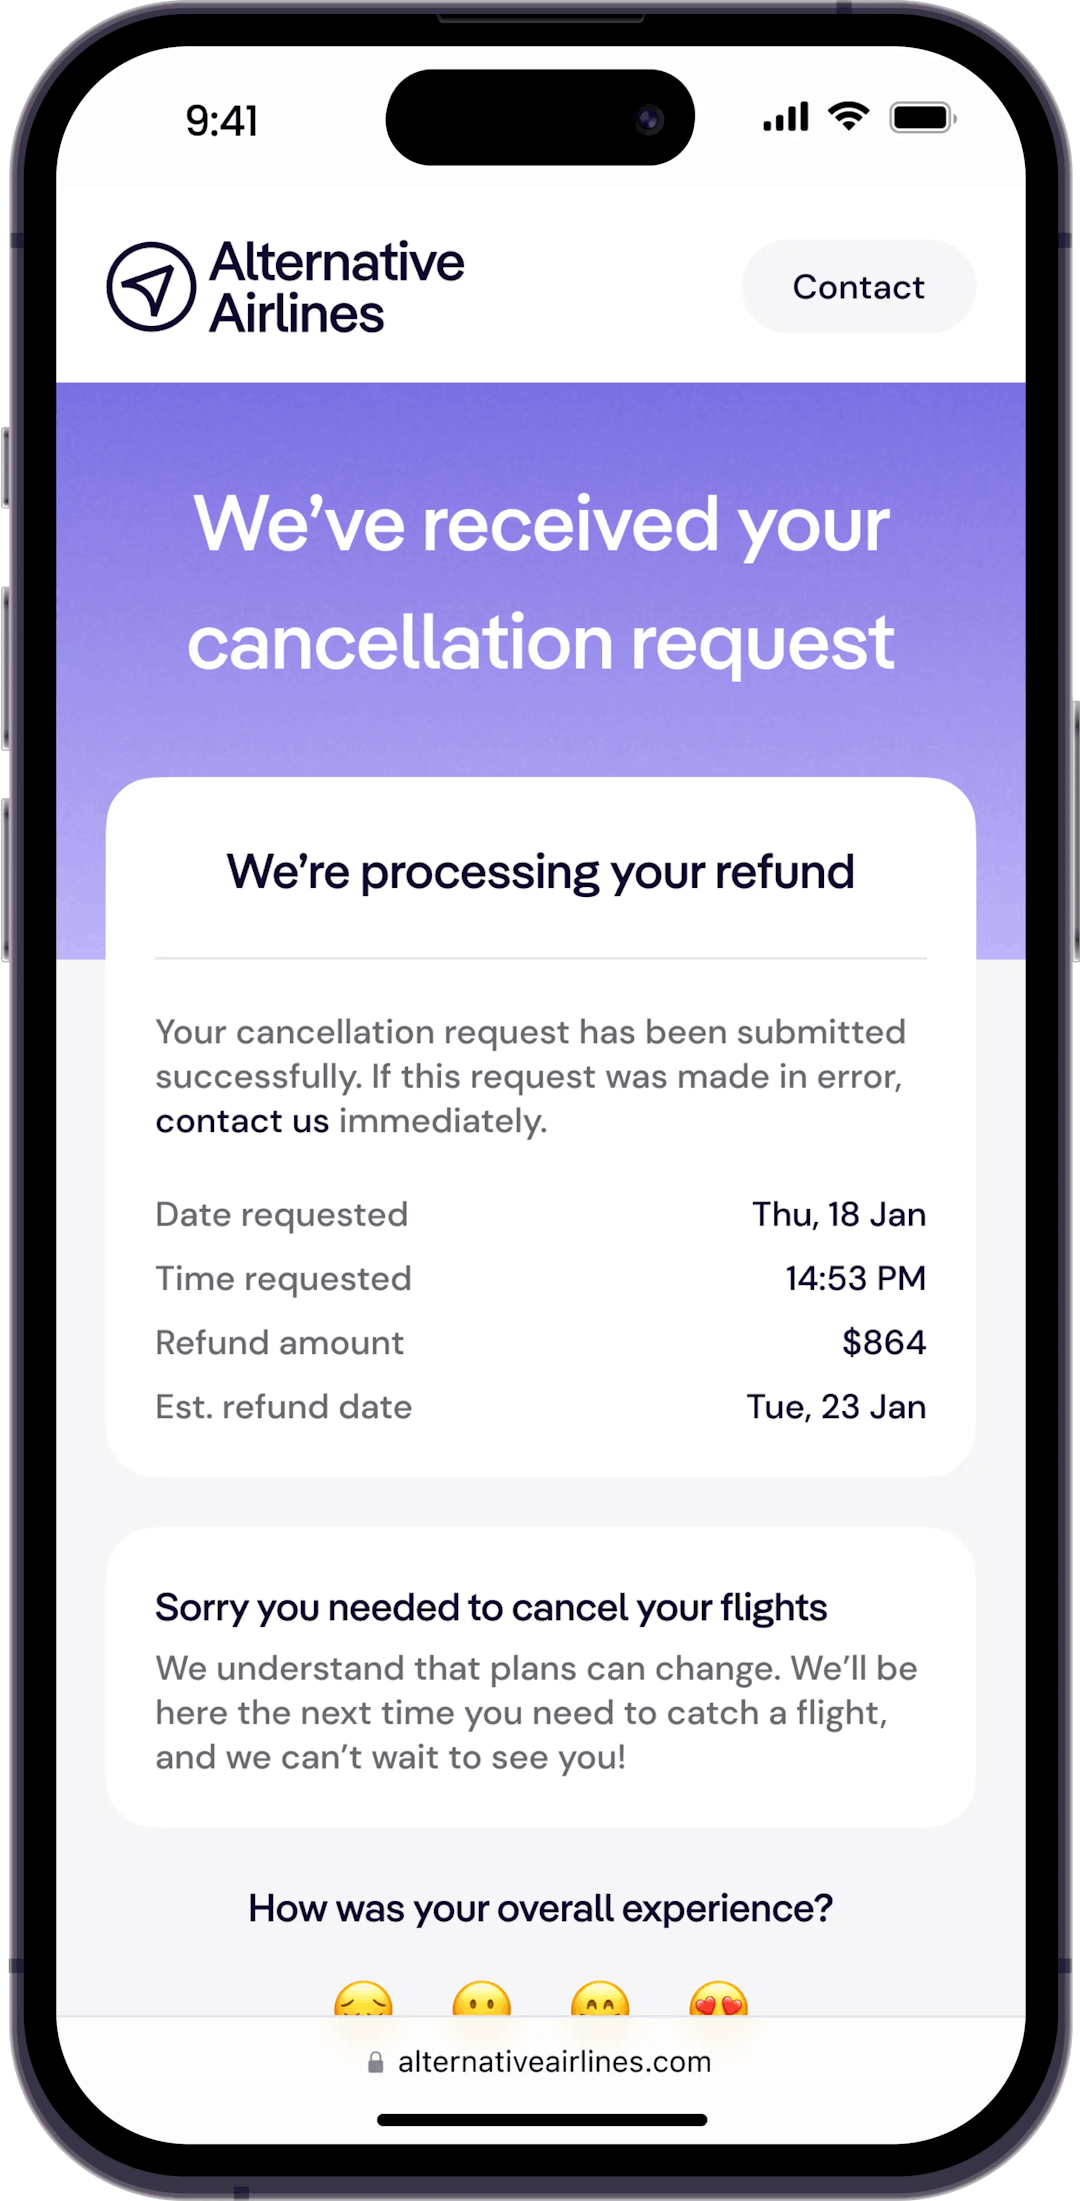 Confirmation of cancellation request